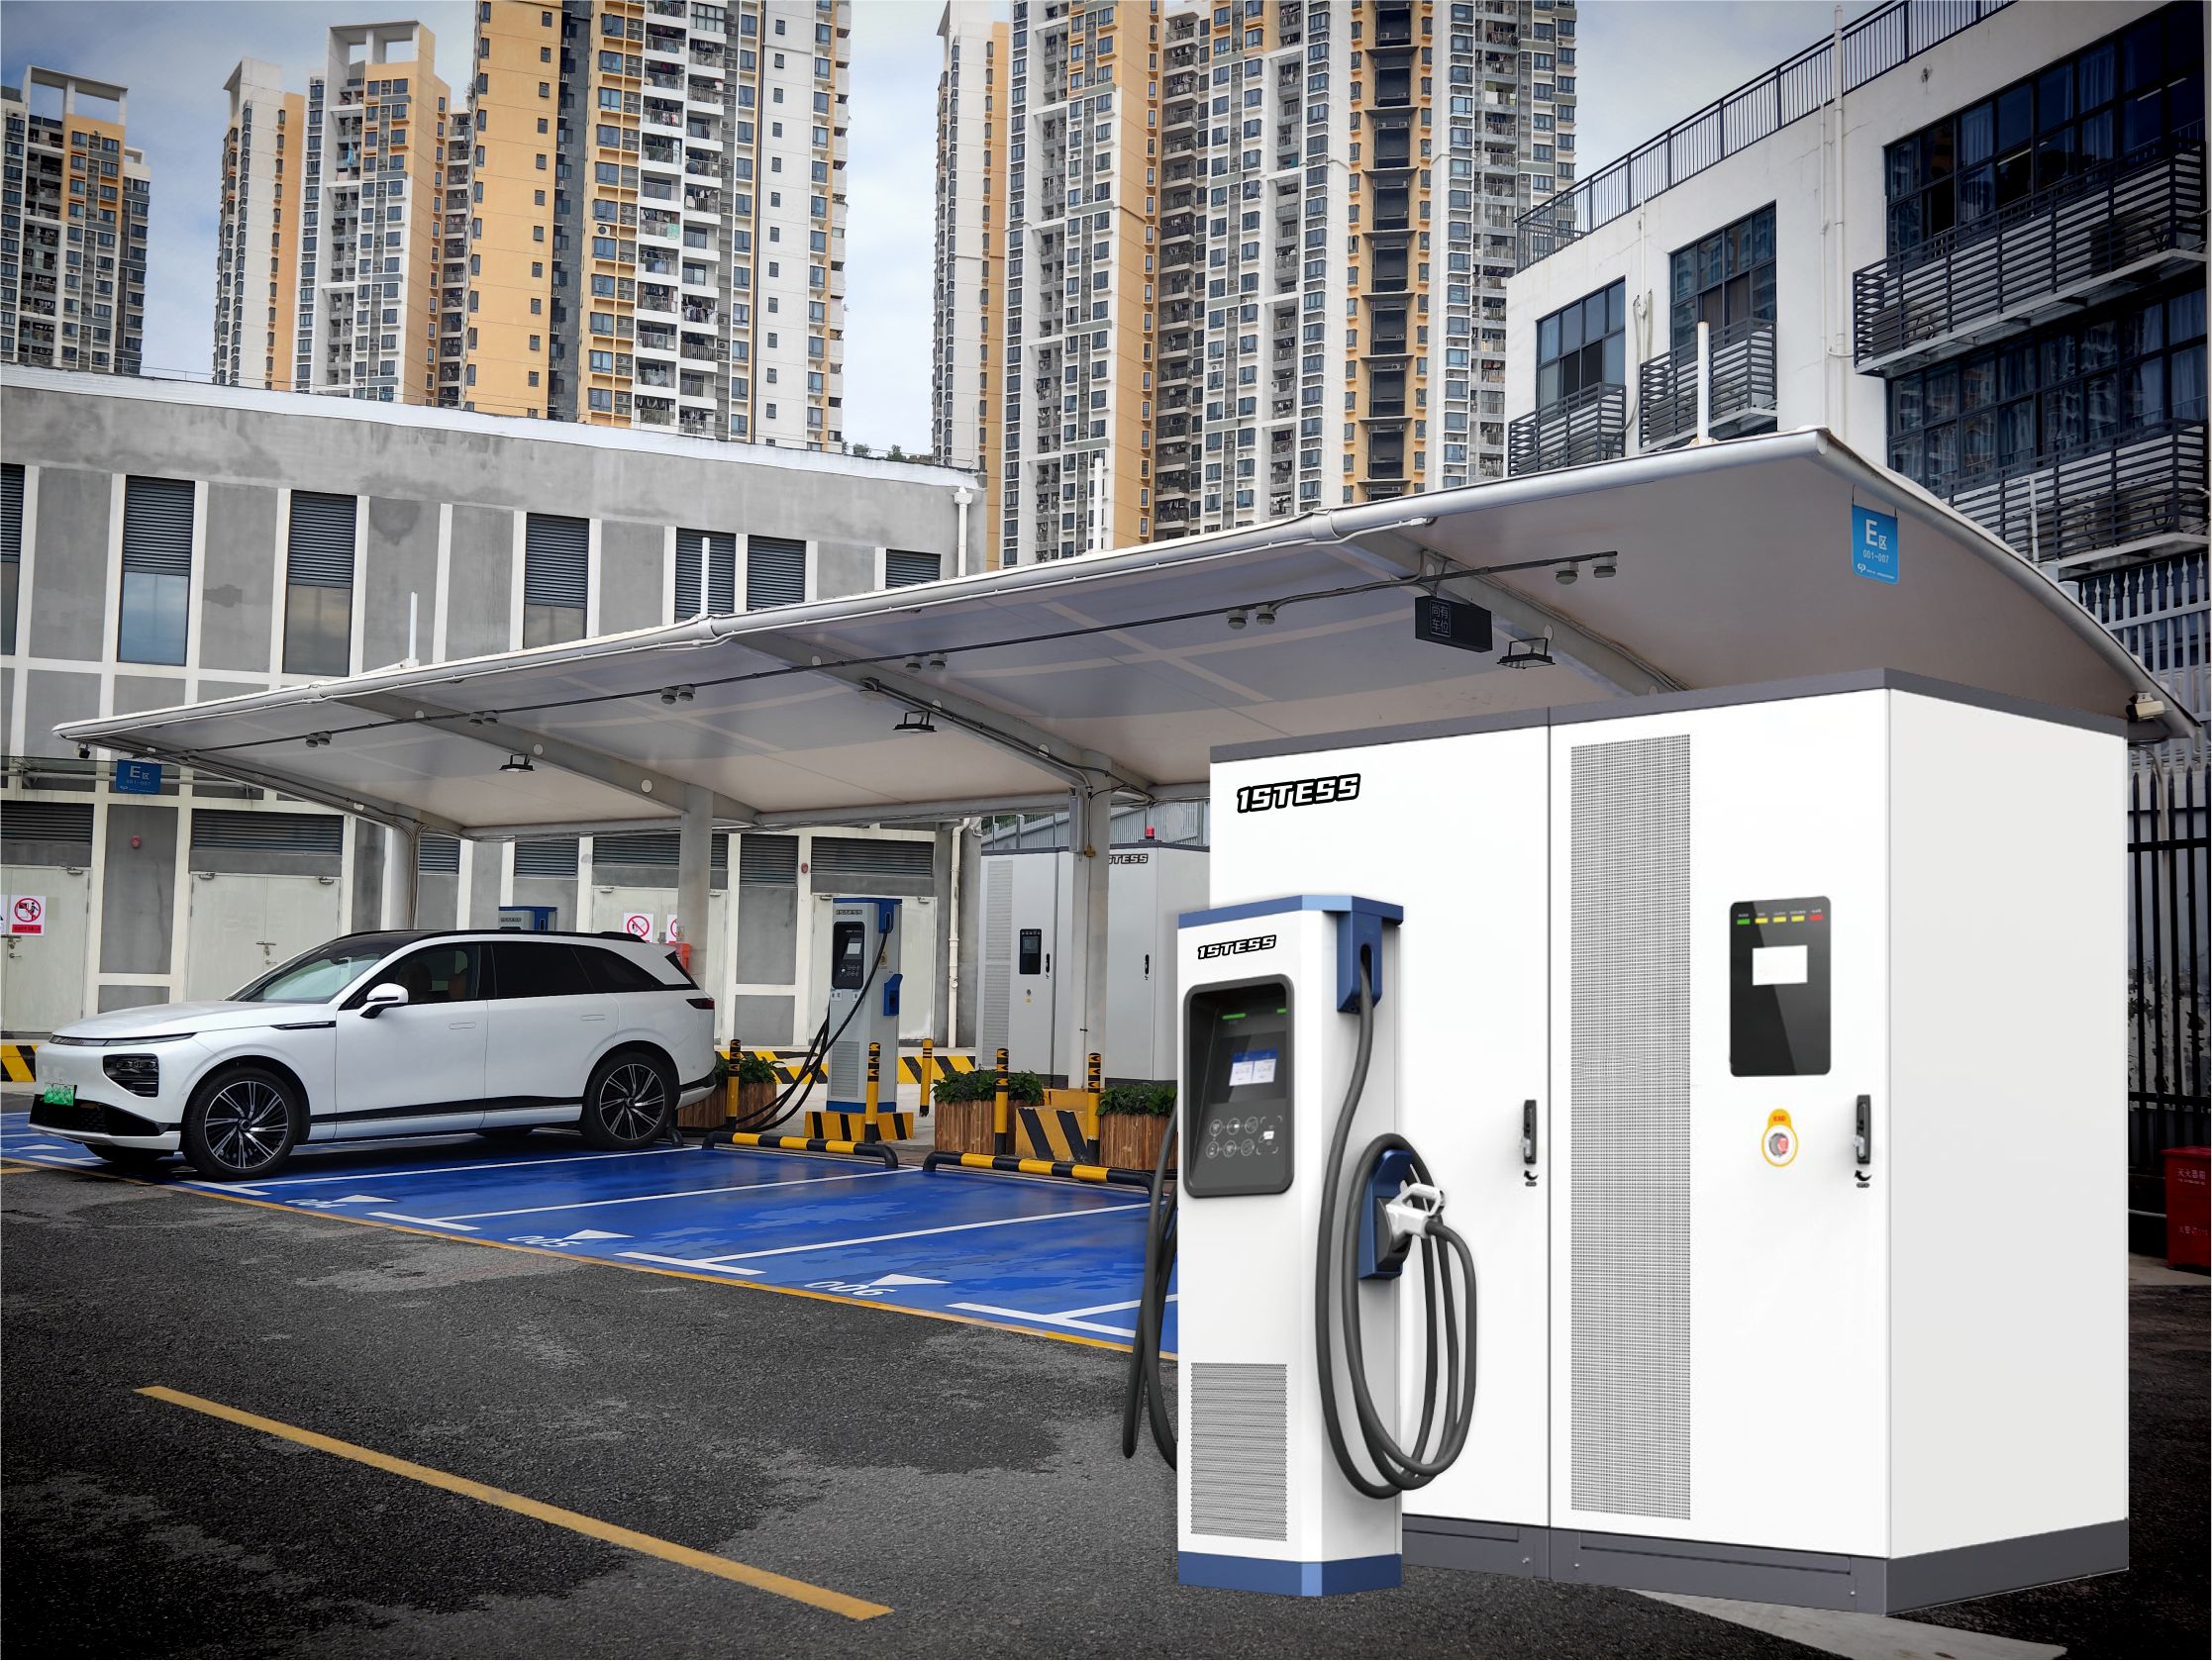 Battery energy storage system and EV charging